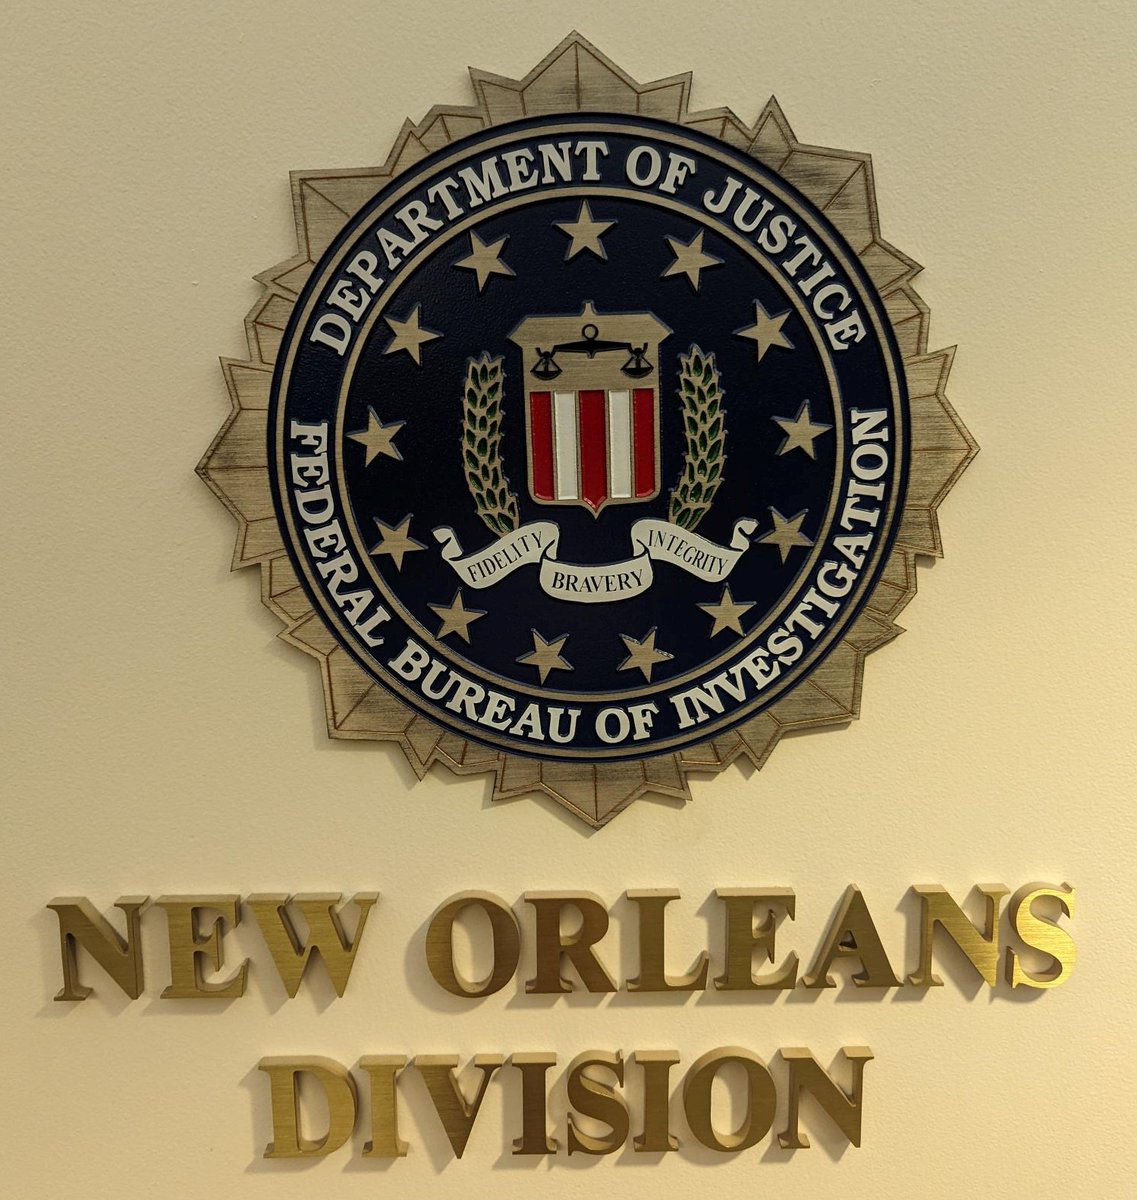 An #FBI New Orleans Project Safe Childhood investigation ends in the indictment of a 66-year-old man. Peter Nealon faces up to 30 years in prison if convicted. Details here: justice.gov/usao-edla/pr/n…